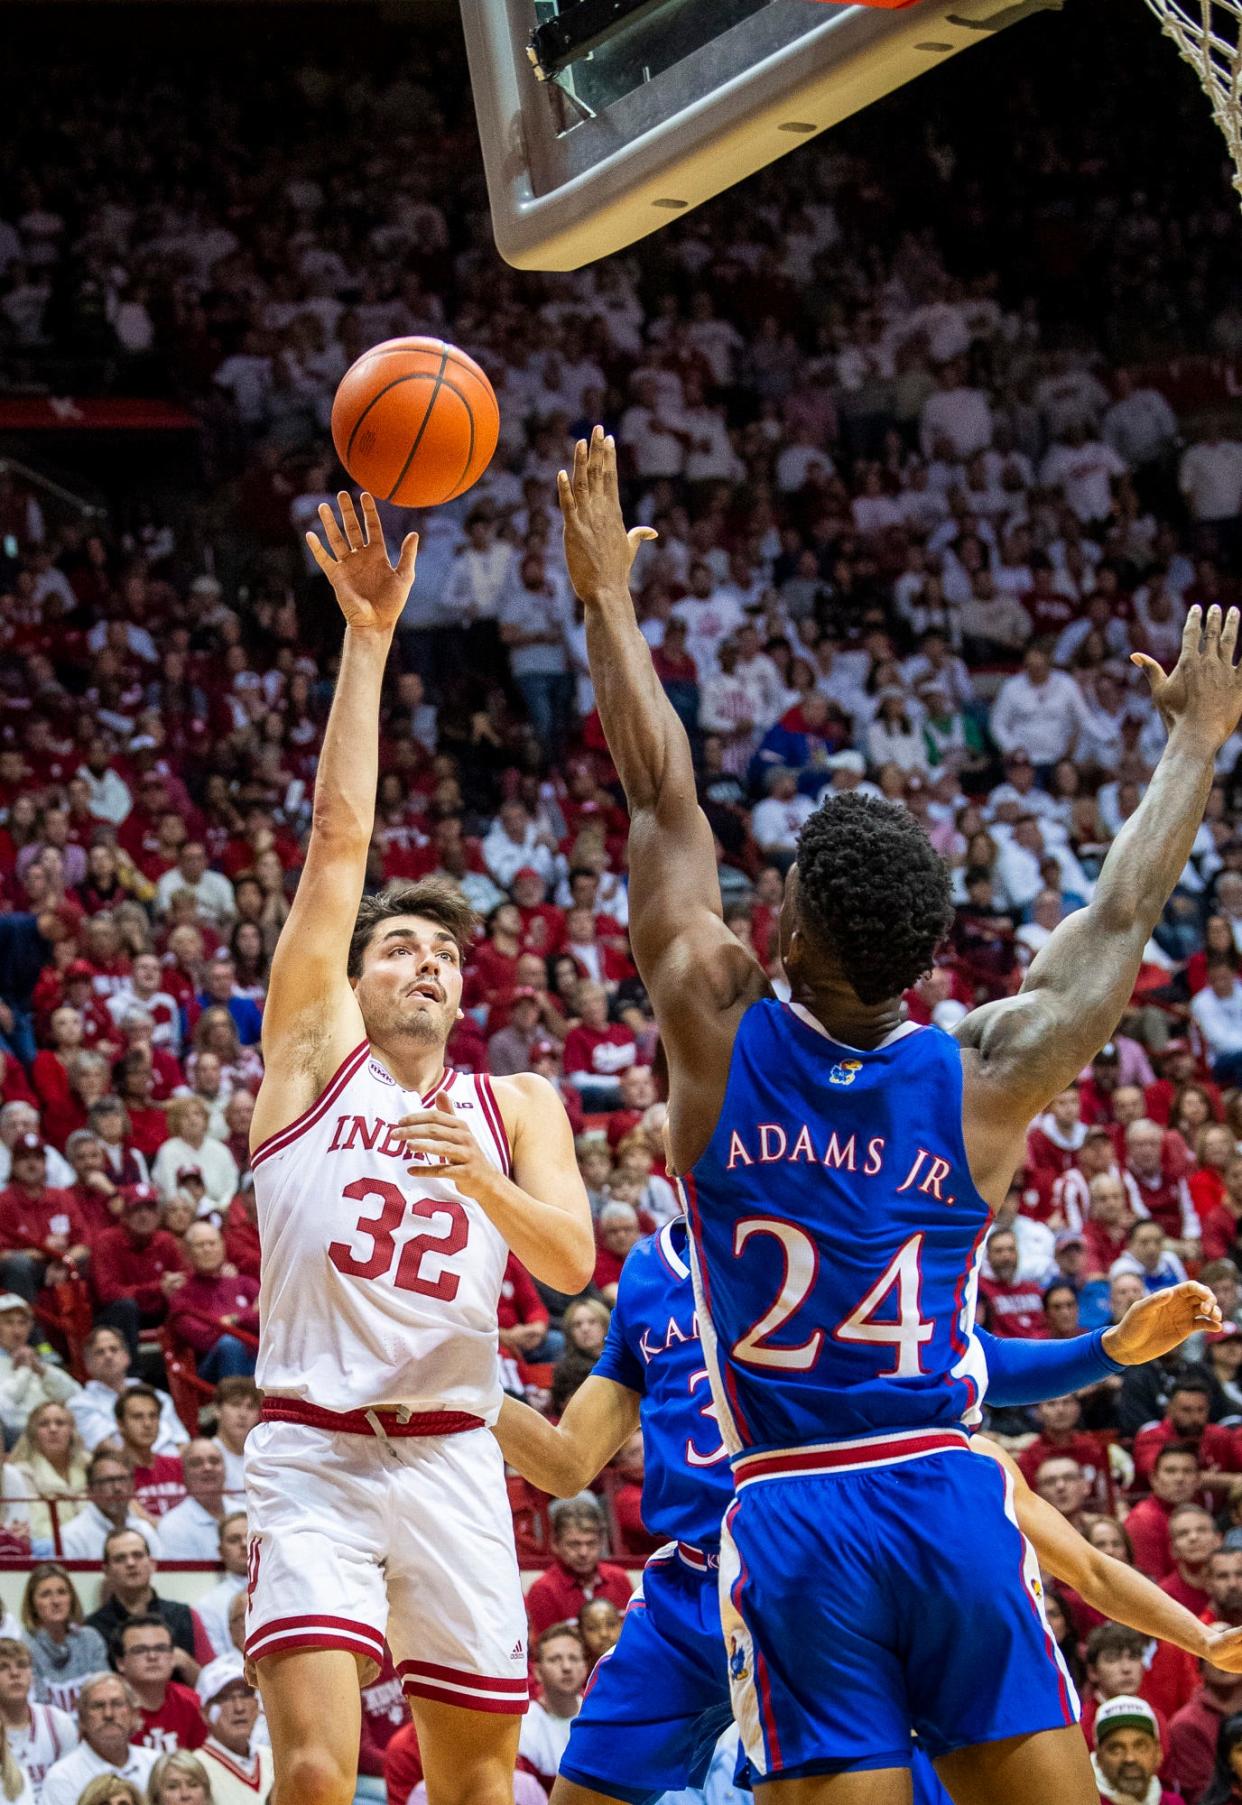 Indiana's Trey Galloway (32) shoots over Kansas' KJ Adams Jr. (24) during the second half of the Indiana versus Kansas men's basketball game at Simon Skjodt Assembly Hall on Saturday, Dec. 16, 2023.